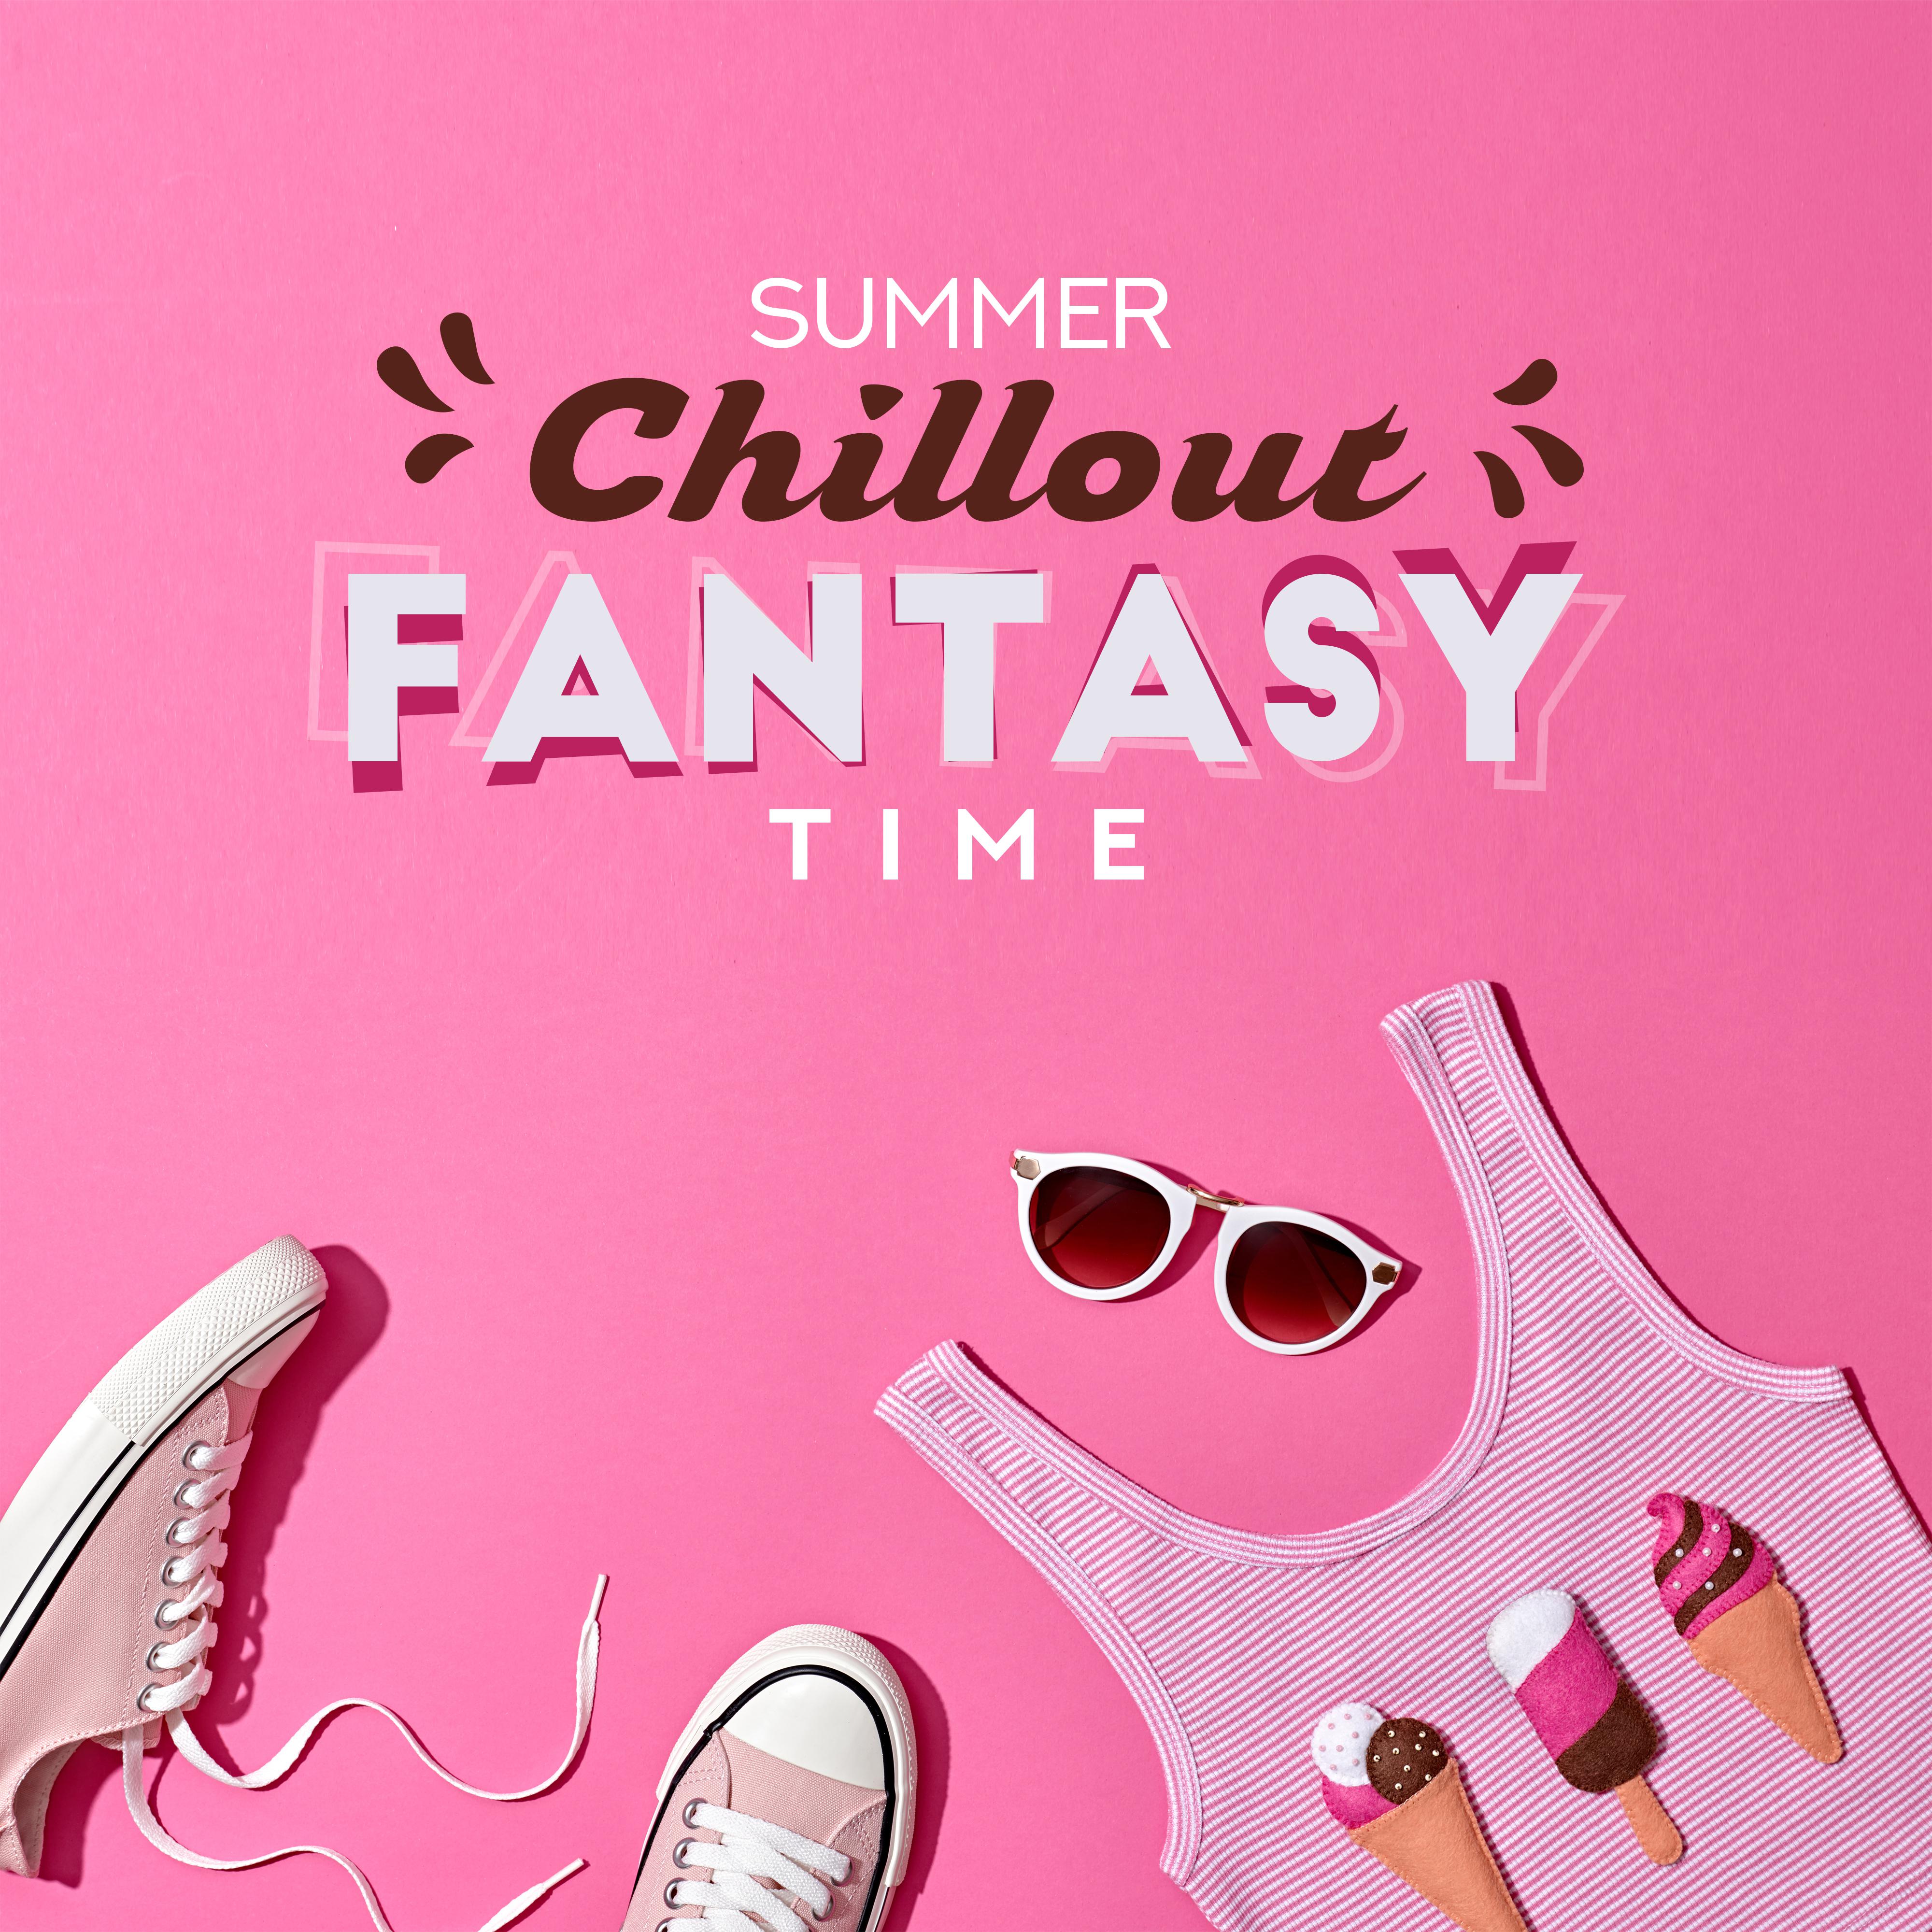 Summer Chillout Fantasy Time: 15 Electronic Energetic Vibes for Perfect Mood & Good Energy